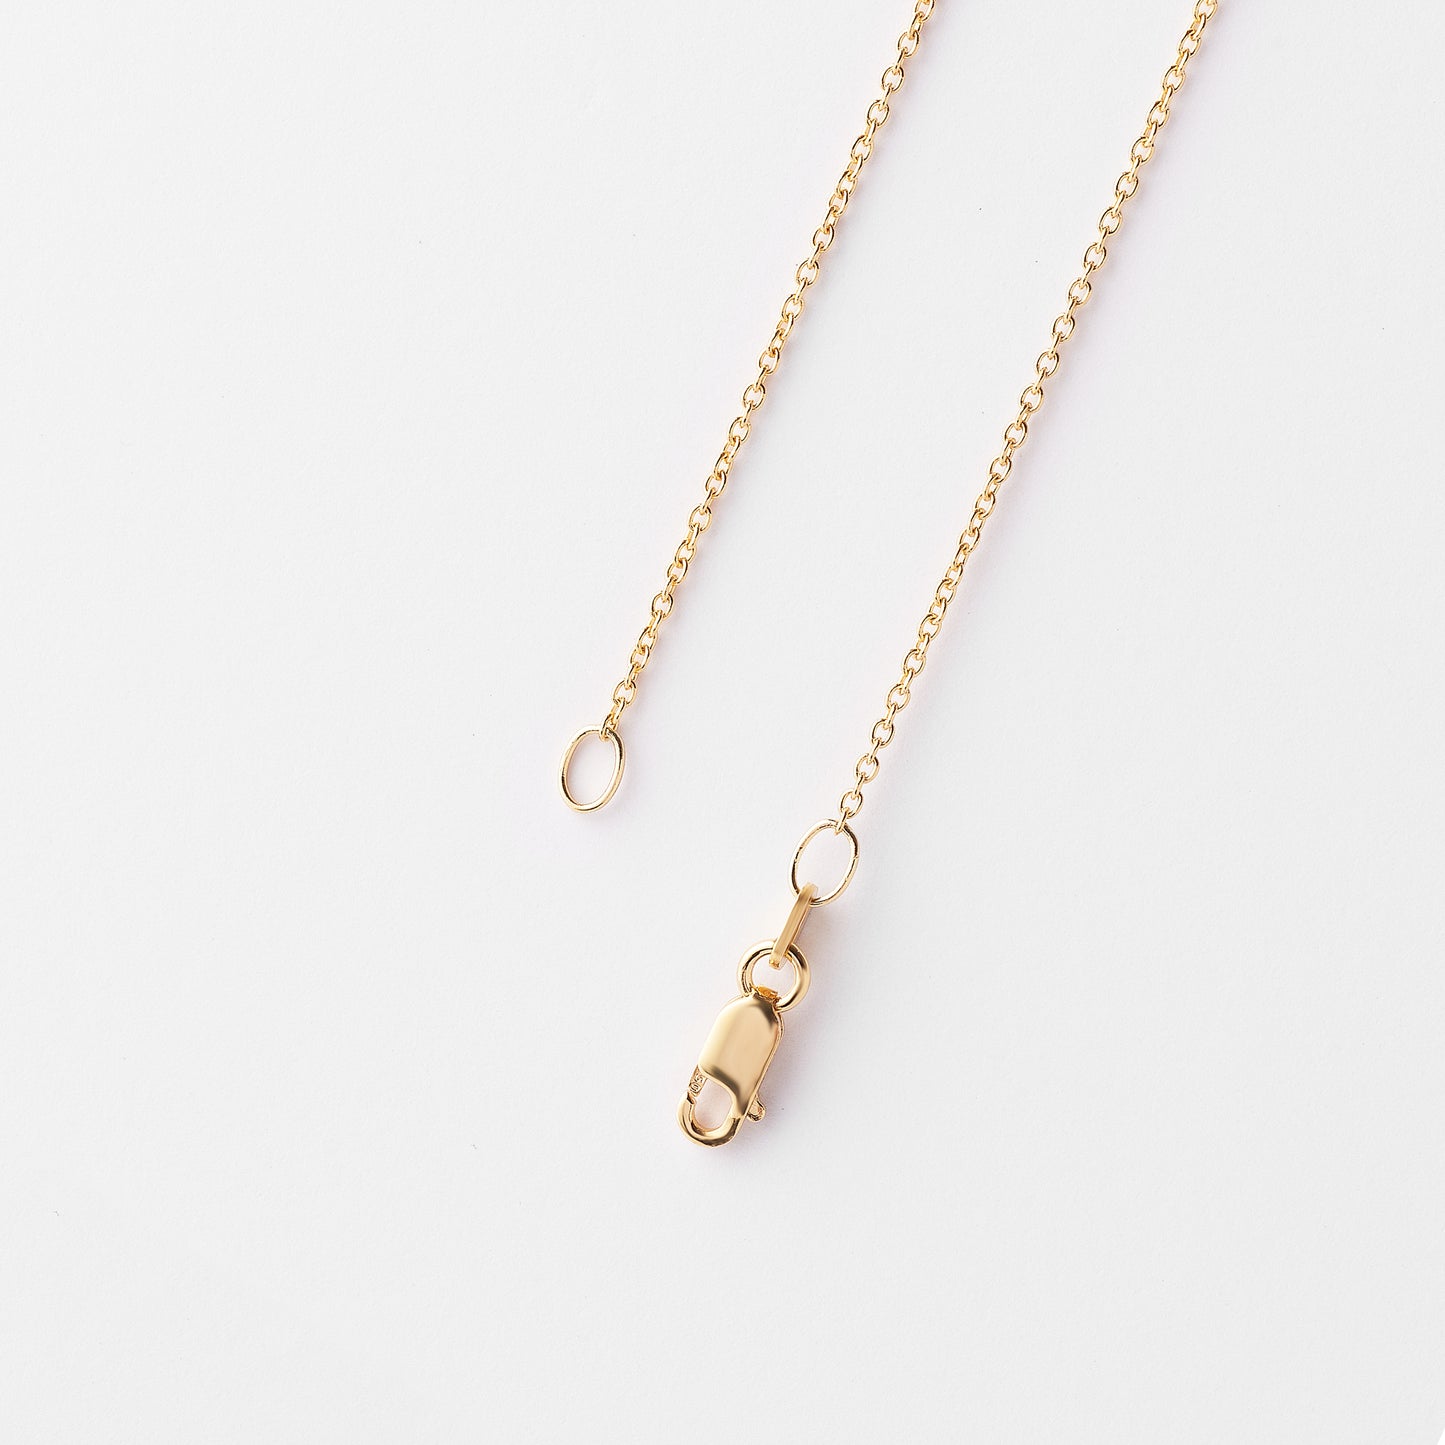 18K Yellow Gold Cable chain